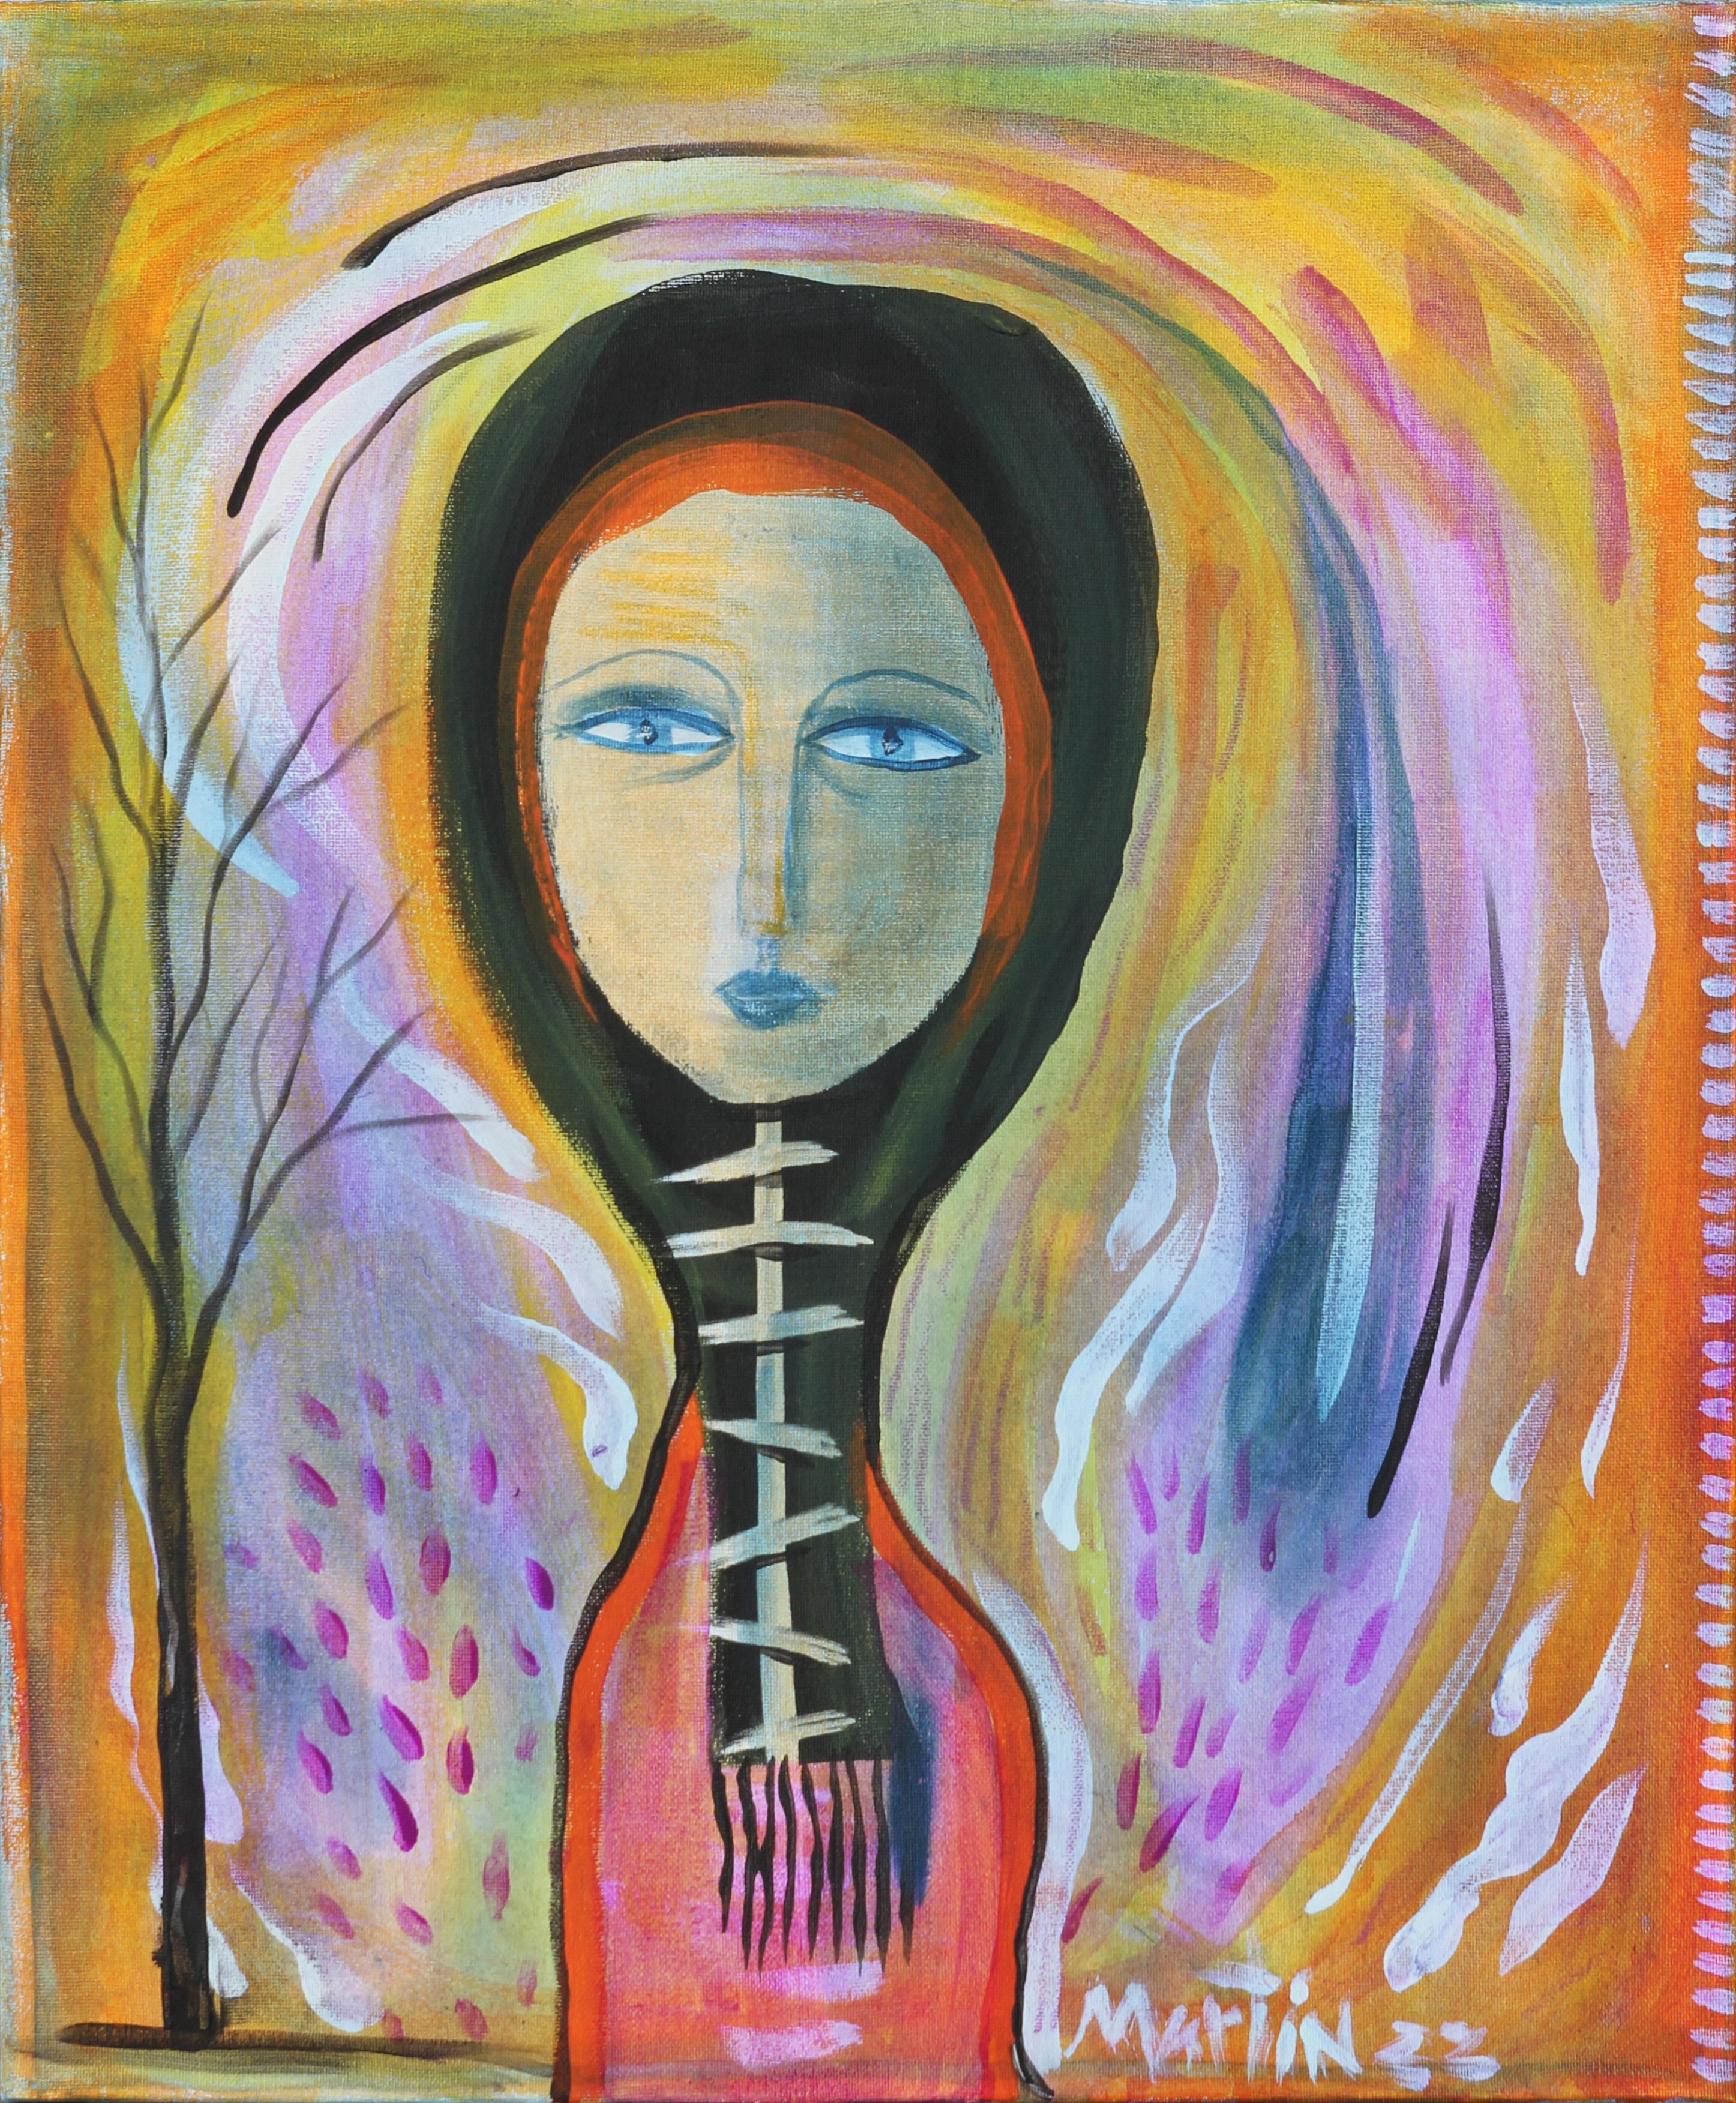 “Walking in the Woods” Orange, Pink, Red, and Black Abstract Figurative Painting